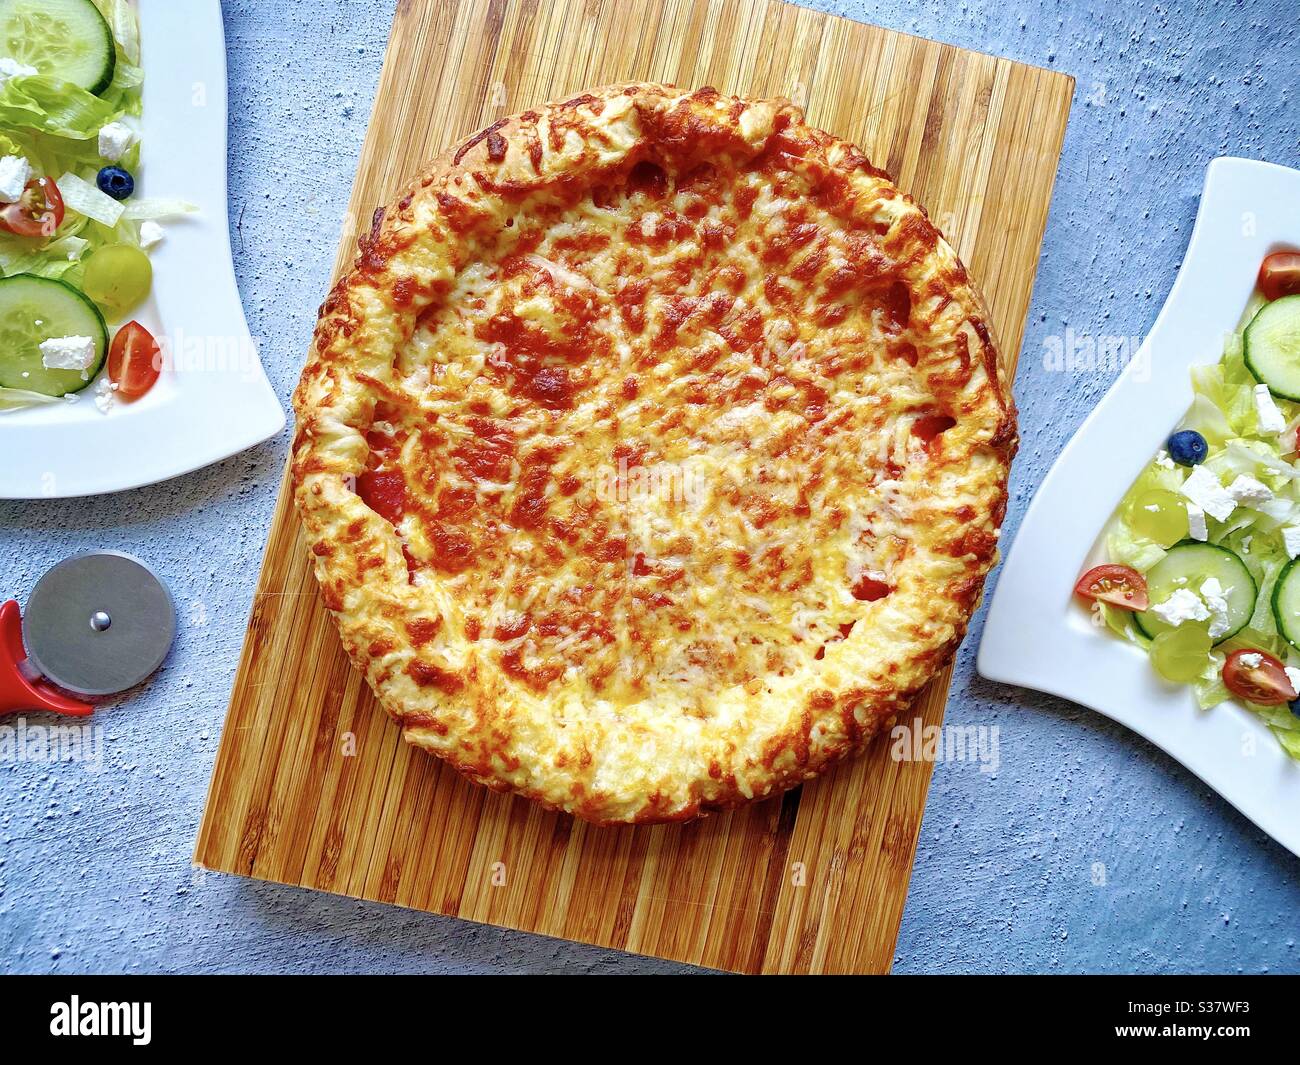 Top down view of freshly baked deep pan cheese and tomato pizza with two plates of fresh feta salad. Cheesy pizza with thick crust against a rough concrete kitchen counter. Flat lay food photography. Stock Photo